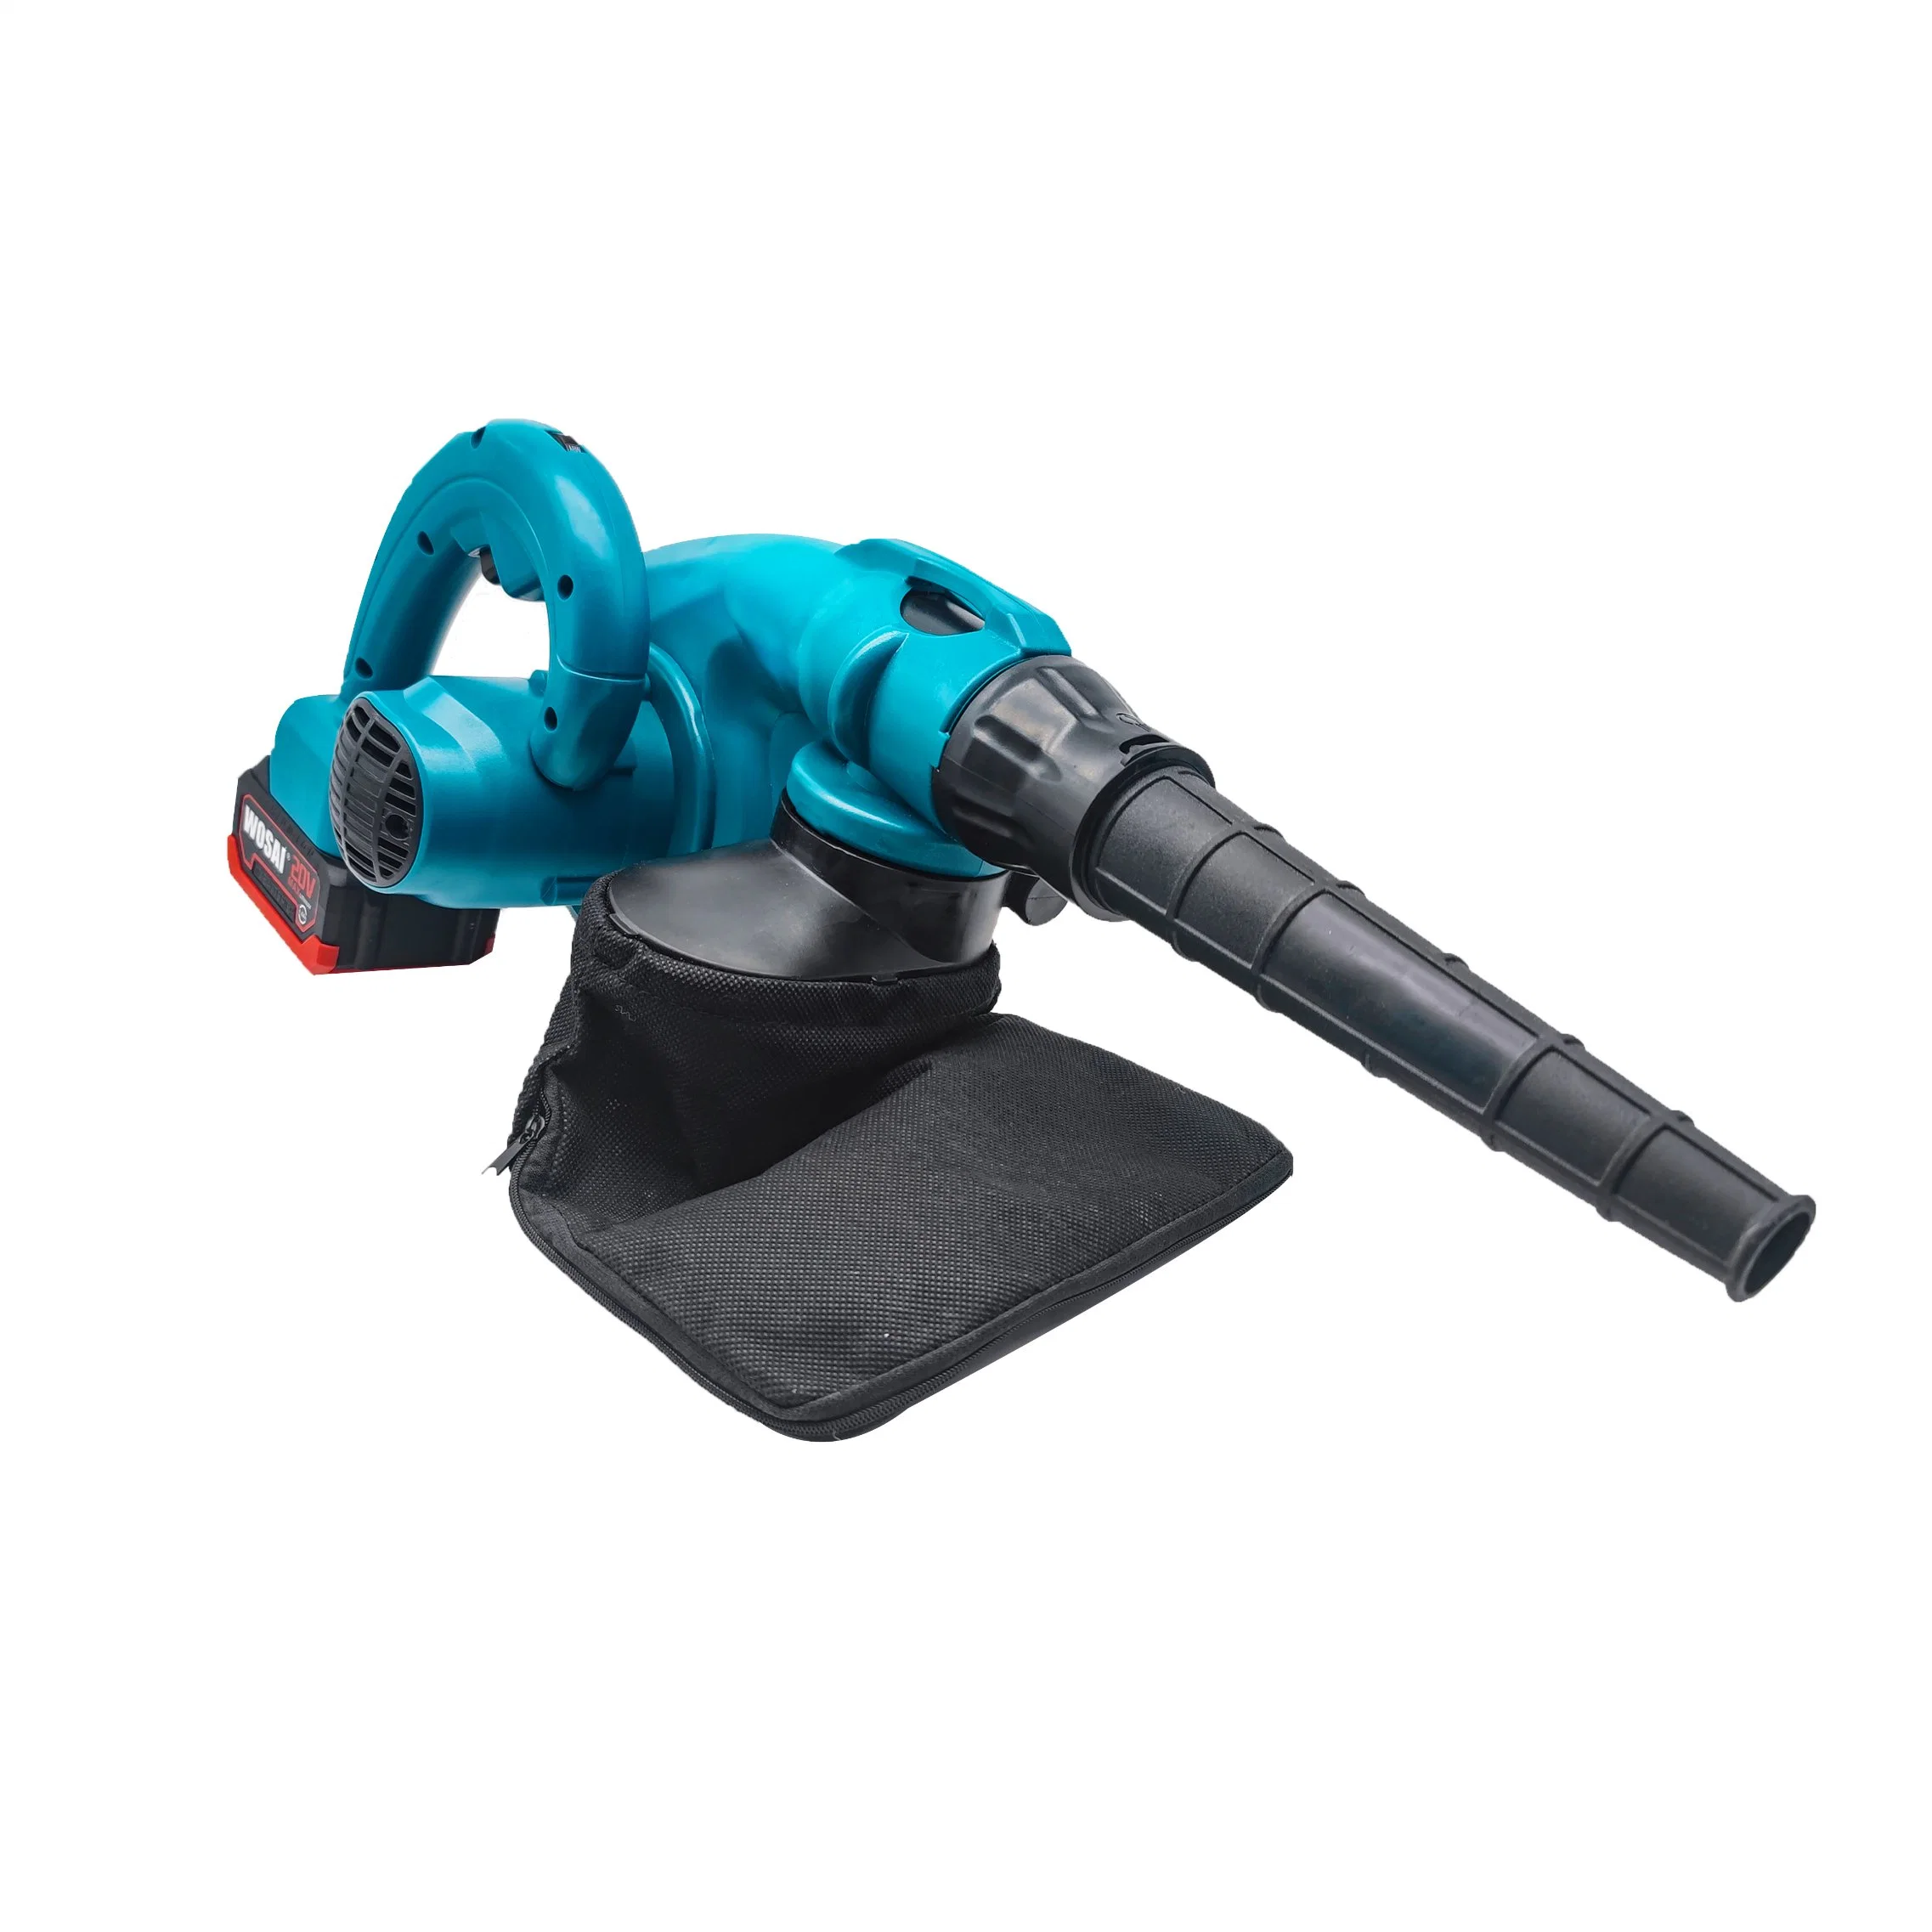 Cordless Electric Air Blower & Suction Portable Handheld Leaf Computer Dust Collector Cleaner Power Tool